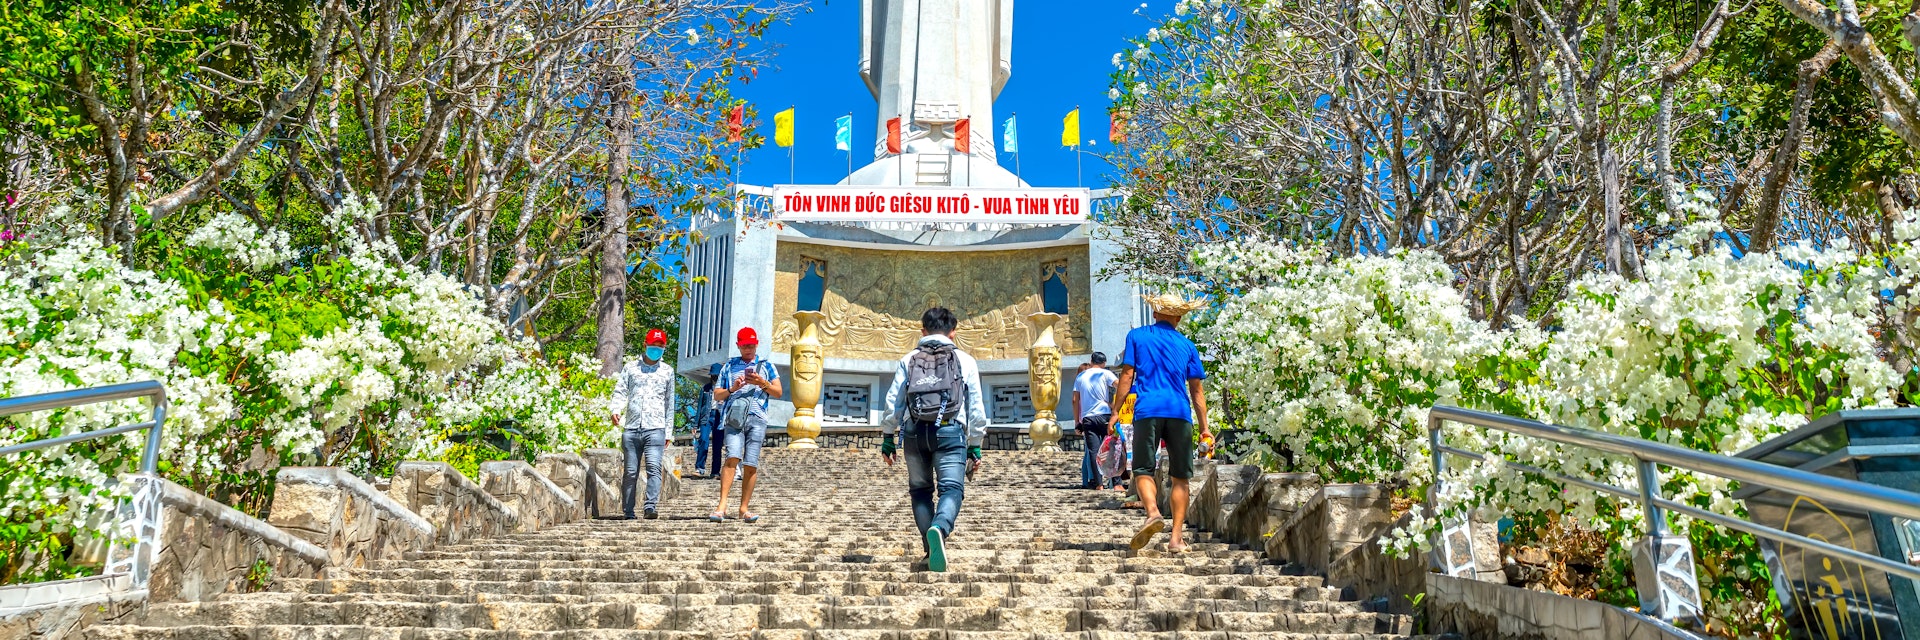 Statue of Jesus Christ standing on Mount Nho attracts pilgrims to visit.